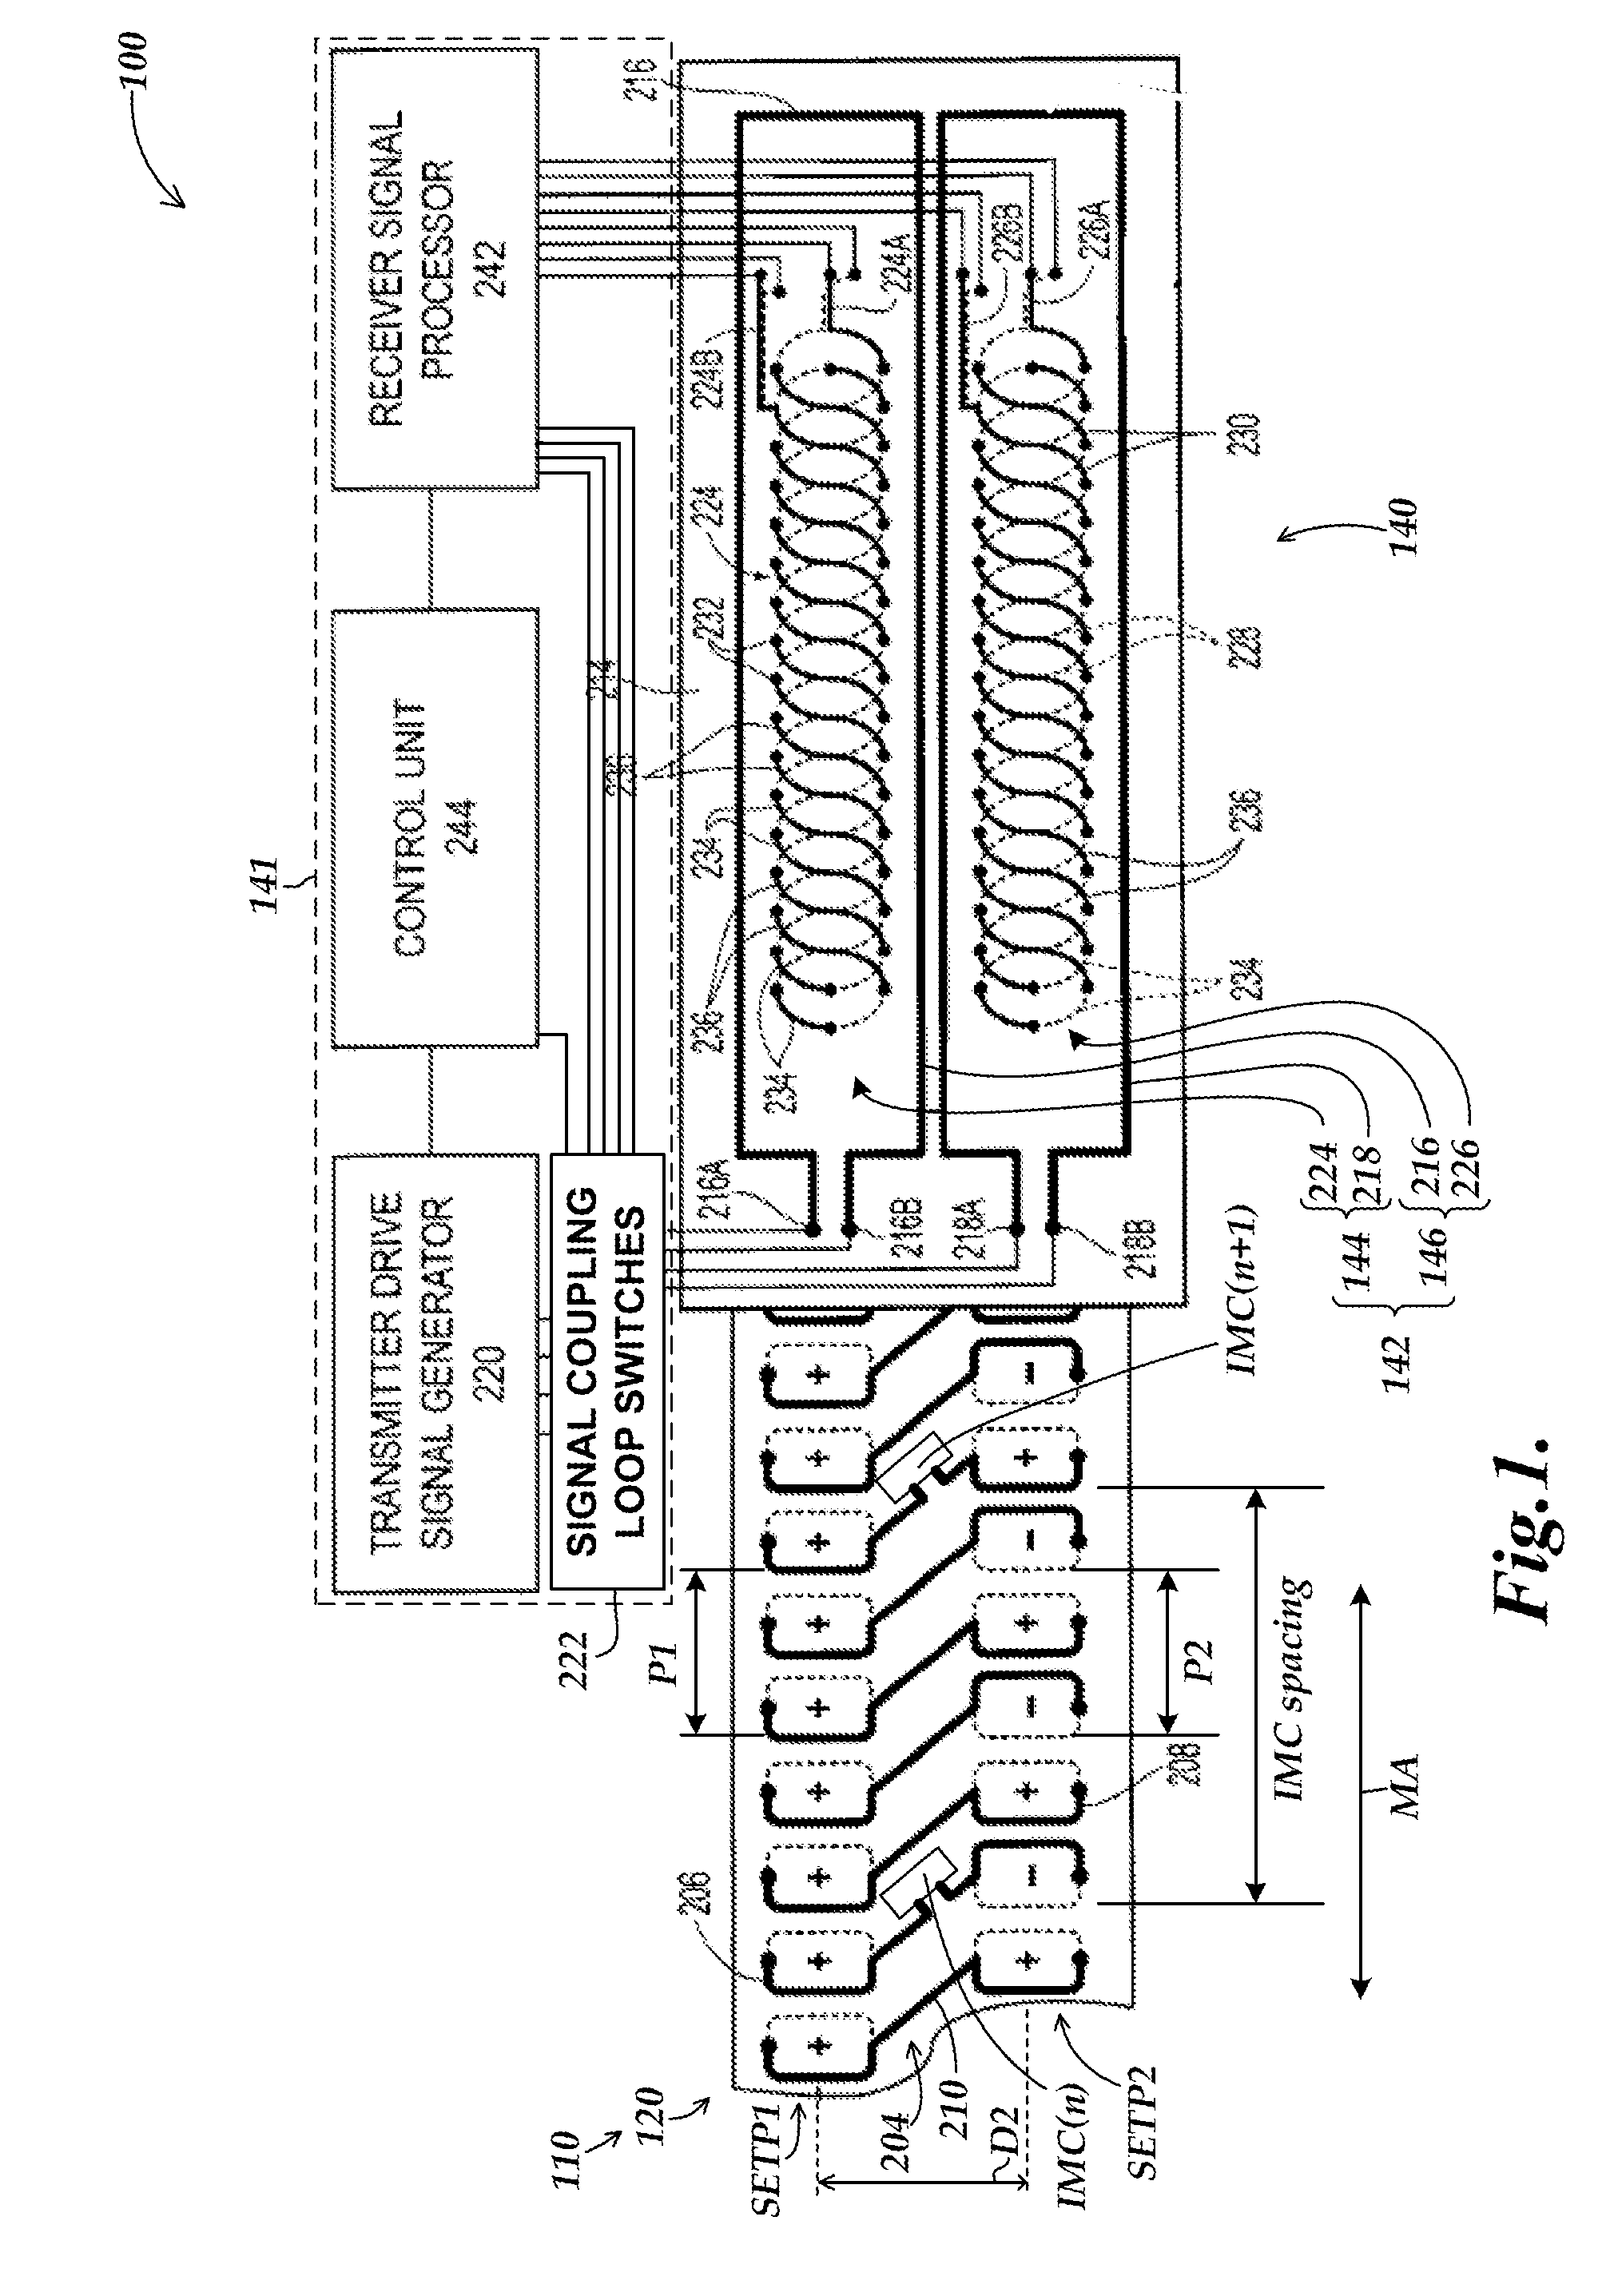 Absolute encoder scale configuration with unique coded impedance modulations